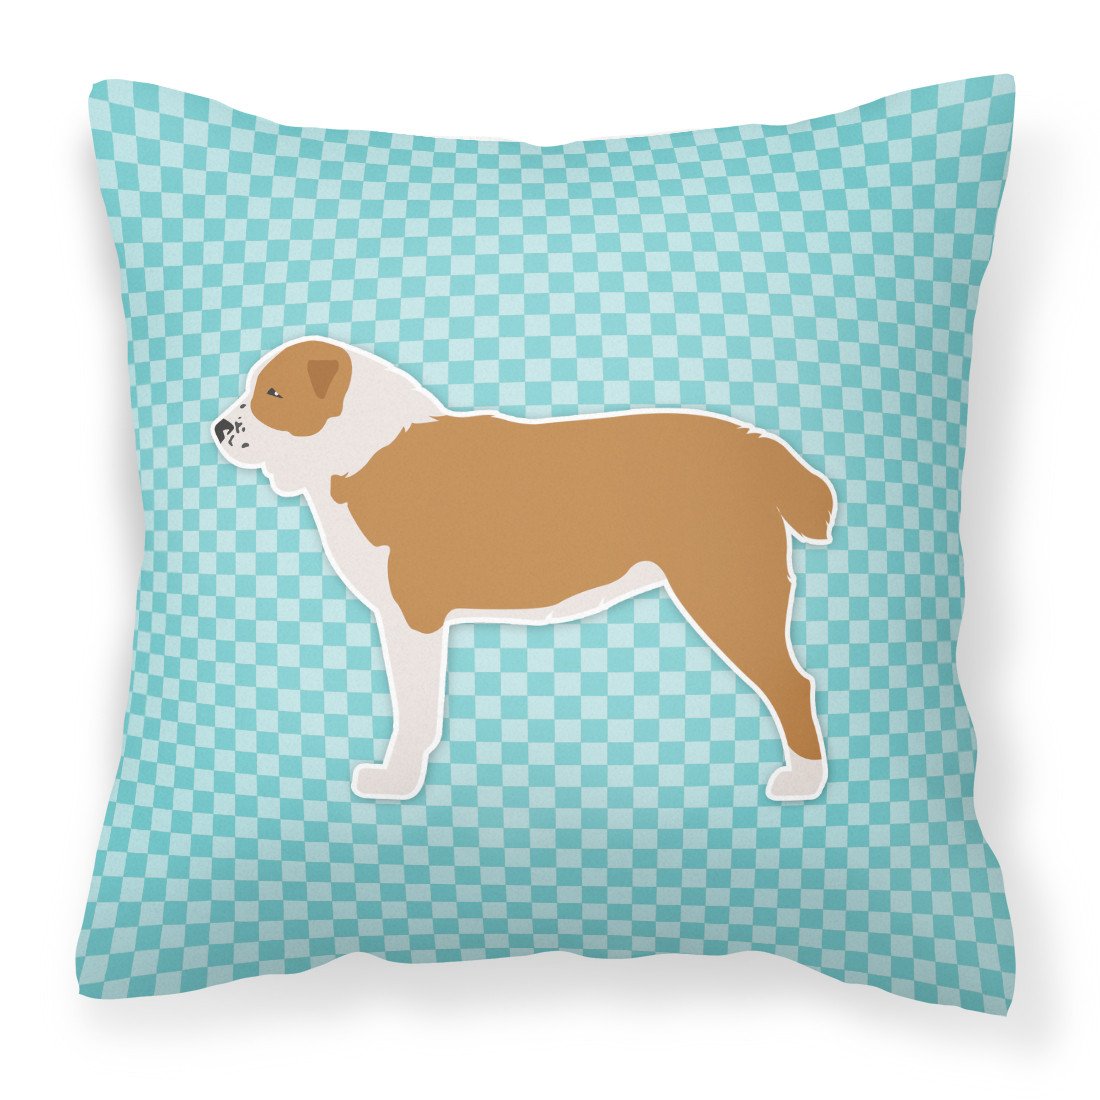 Central Asian Shepherd Dog Checkerboard Blue Fabric Decorative Pillow BB3728PW1818 by Caroline's Treasures